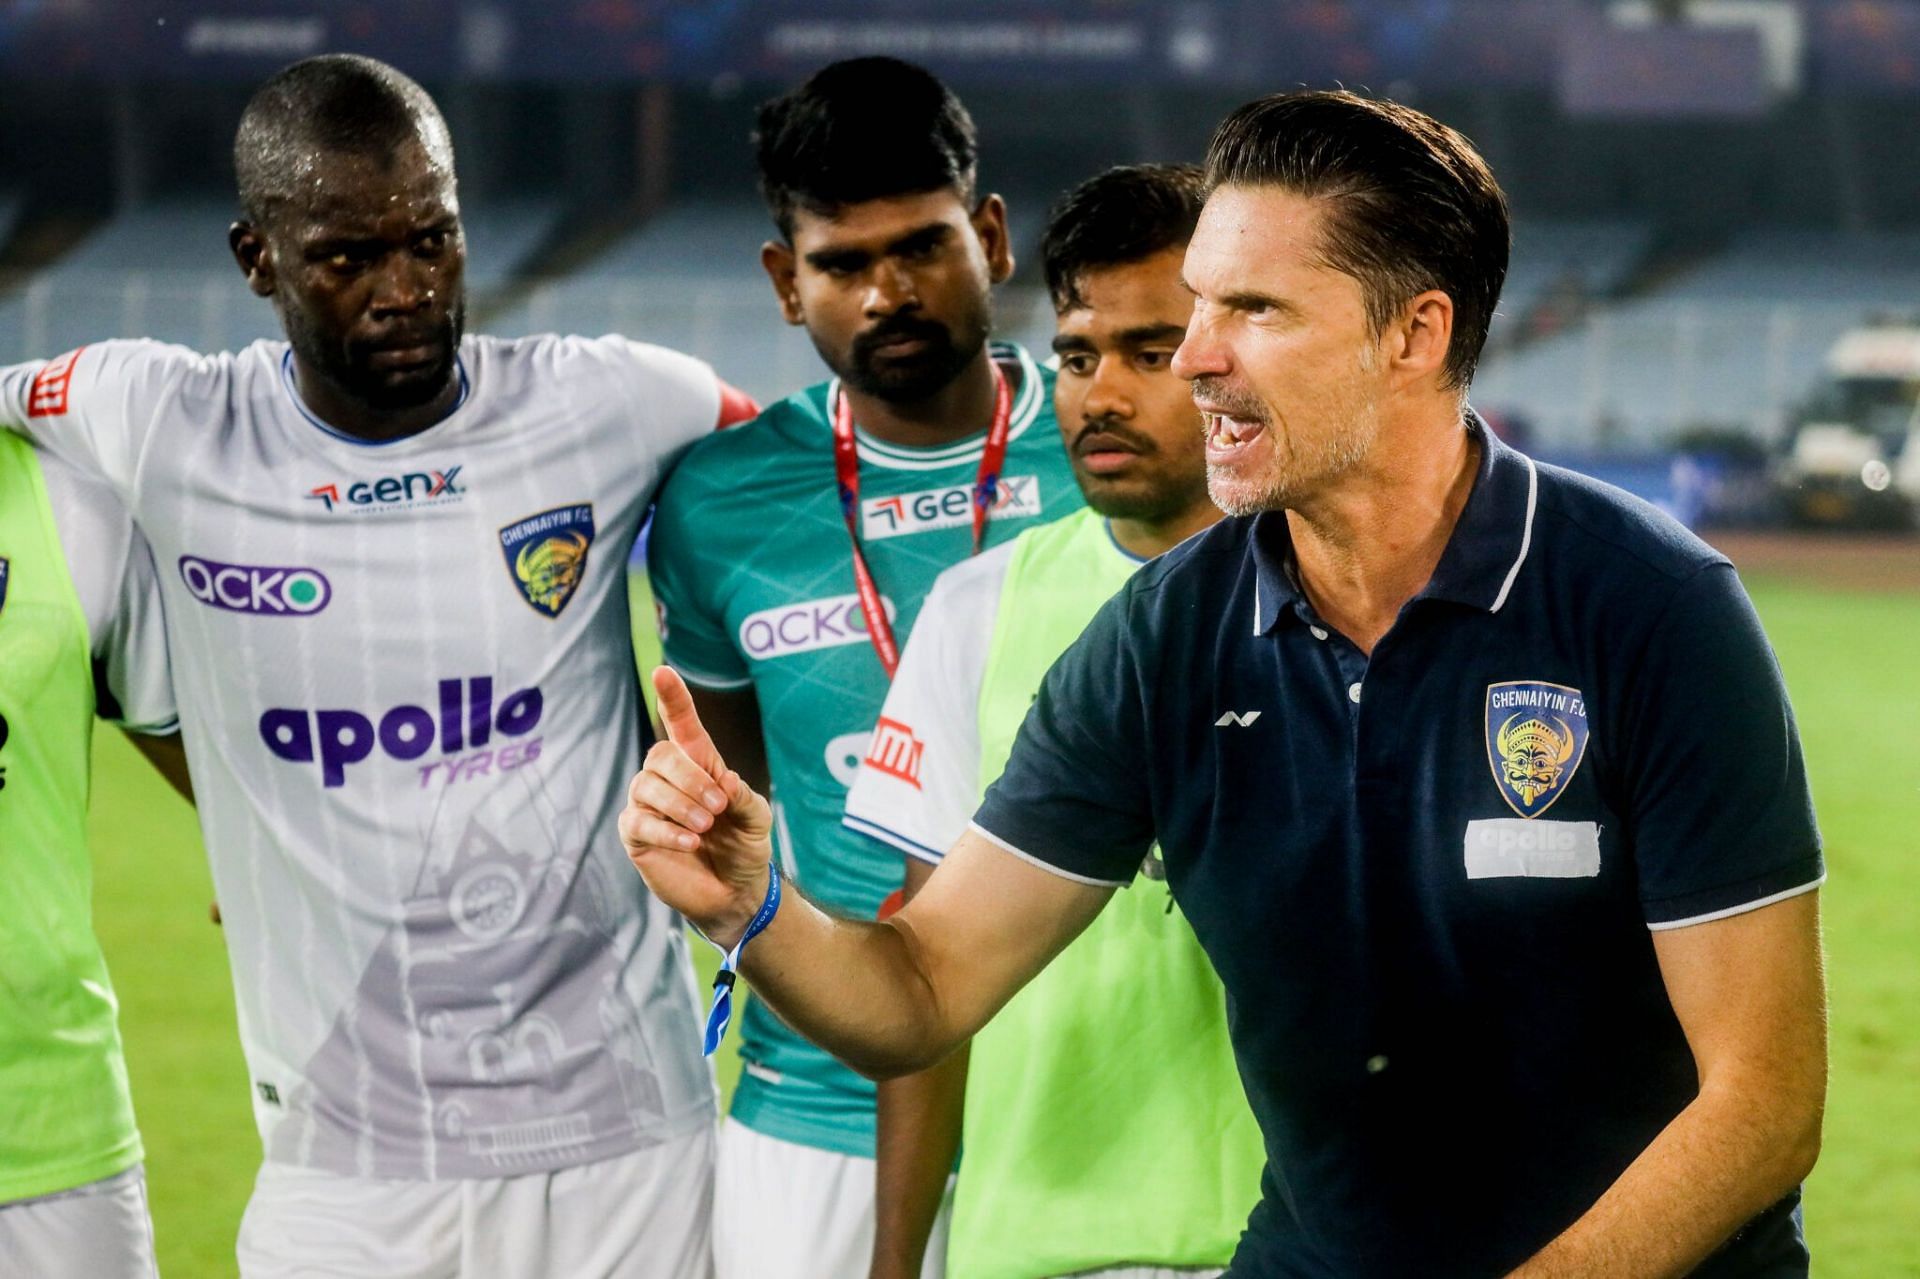 Chennaiyin FC coach Thomas Brdaric speaks to his players after a match. [Credits: CFC official website]